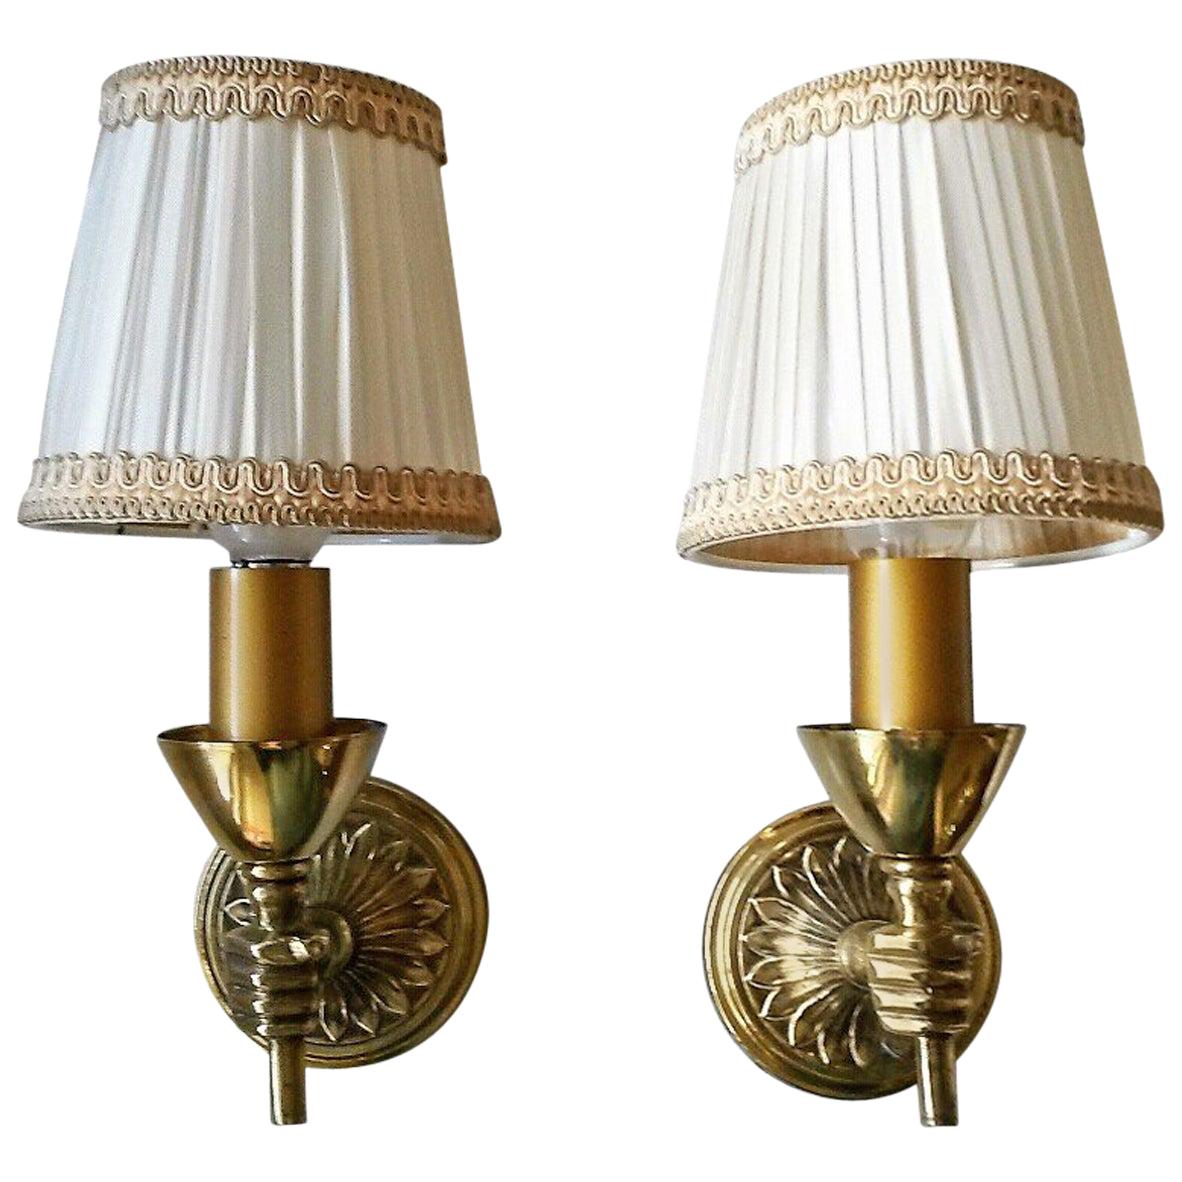 Charming Pair of Neoclassical Bronze Sconces, France, 1950s